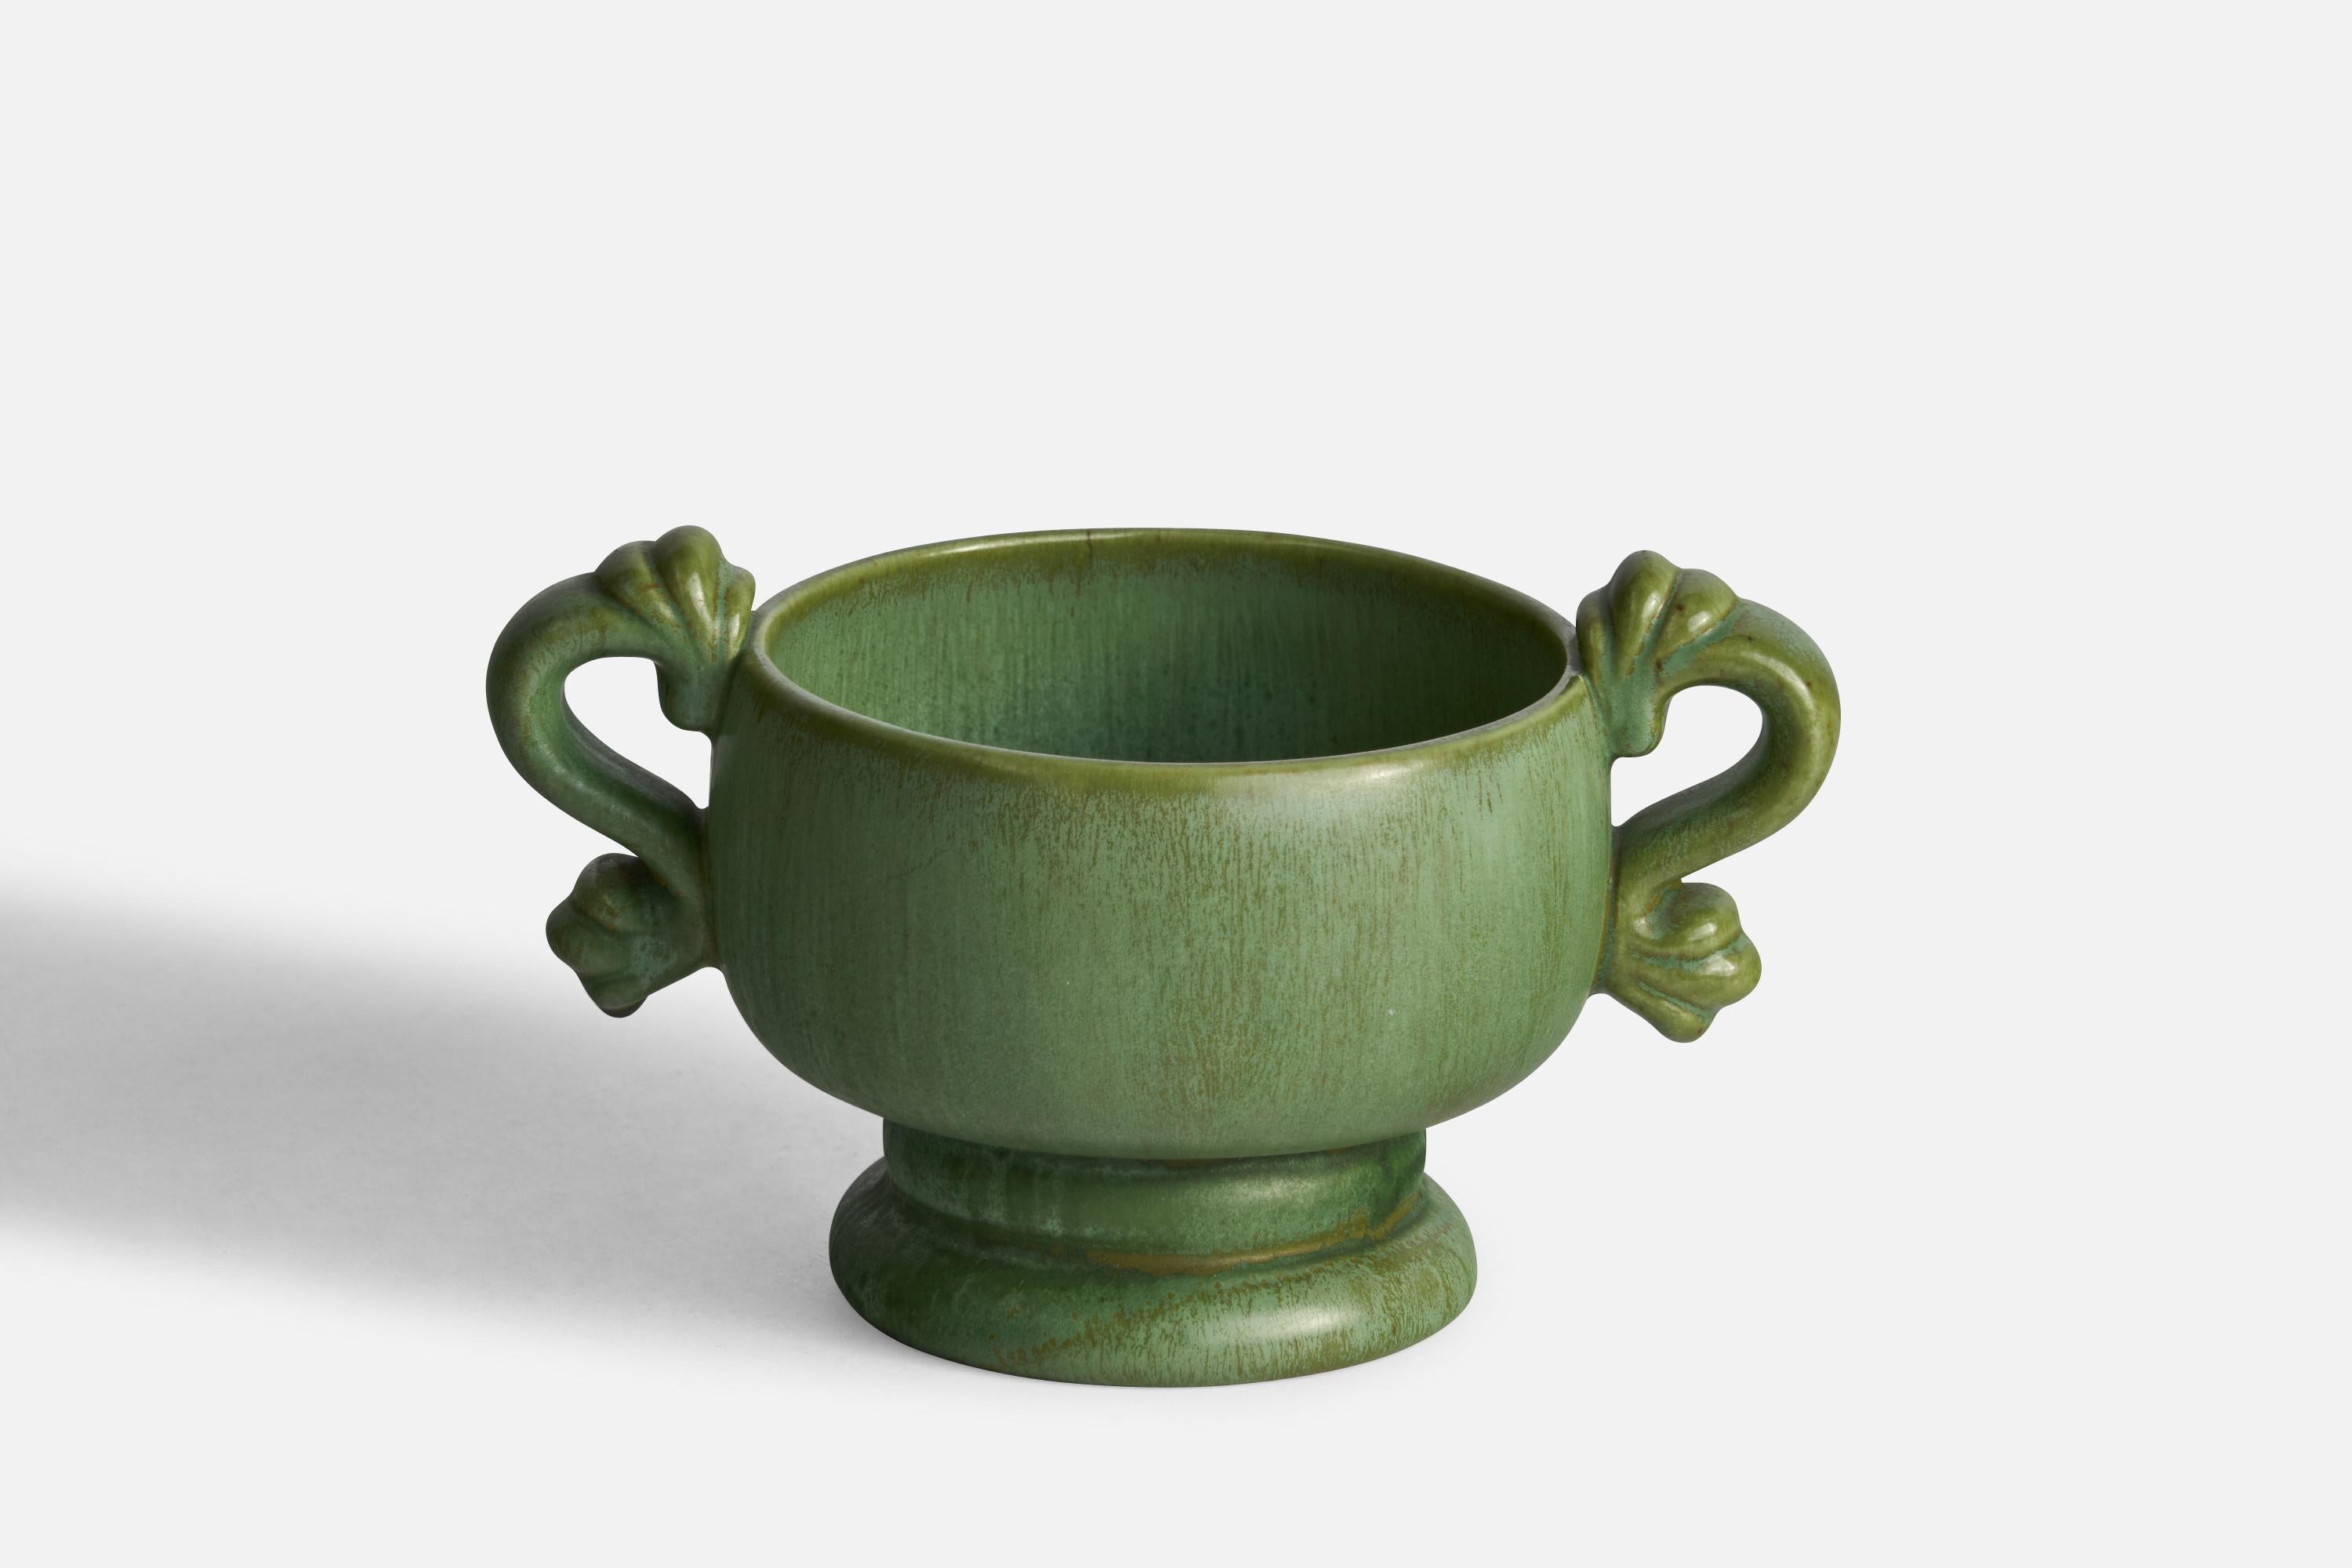 A green-glazed ceramic bowl designed by Arthur Percy and produced by Gefle, Sweden, c. 1930s.